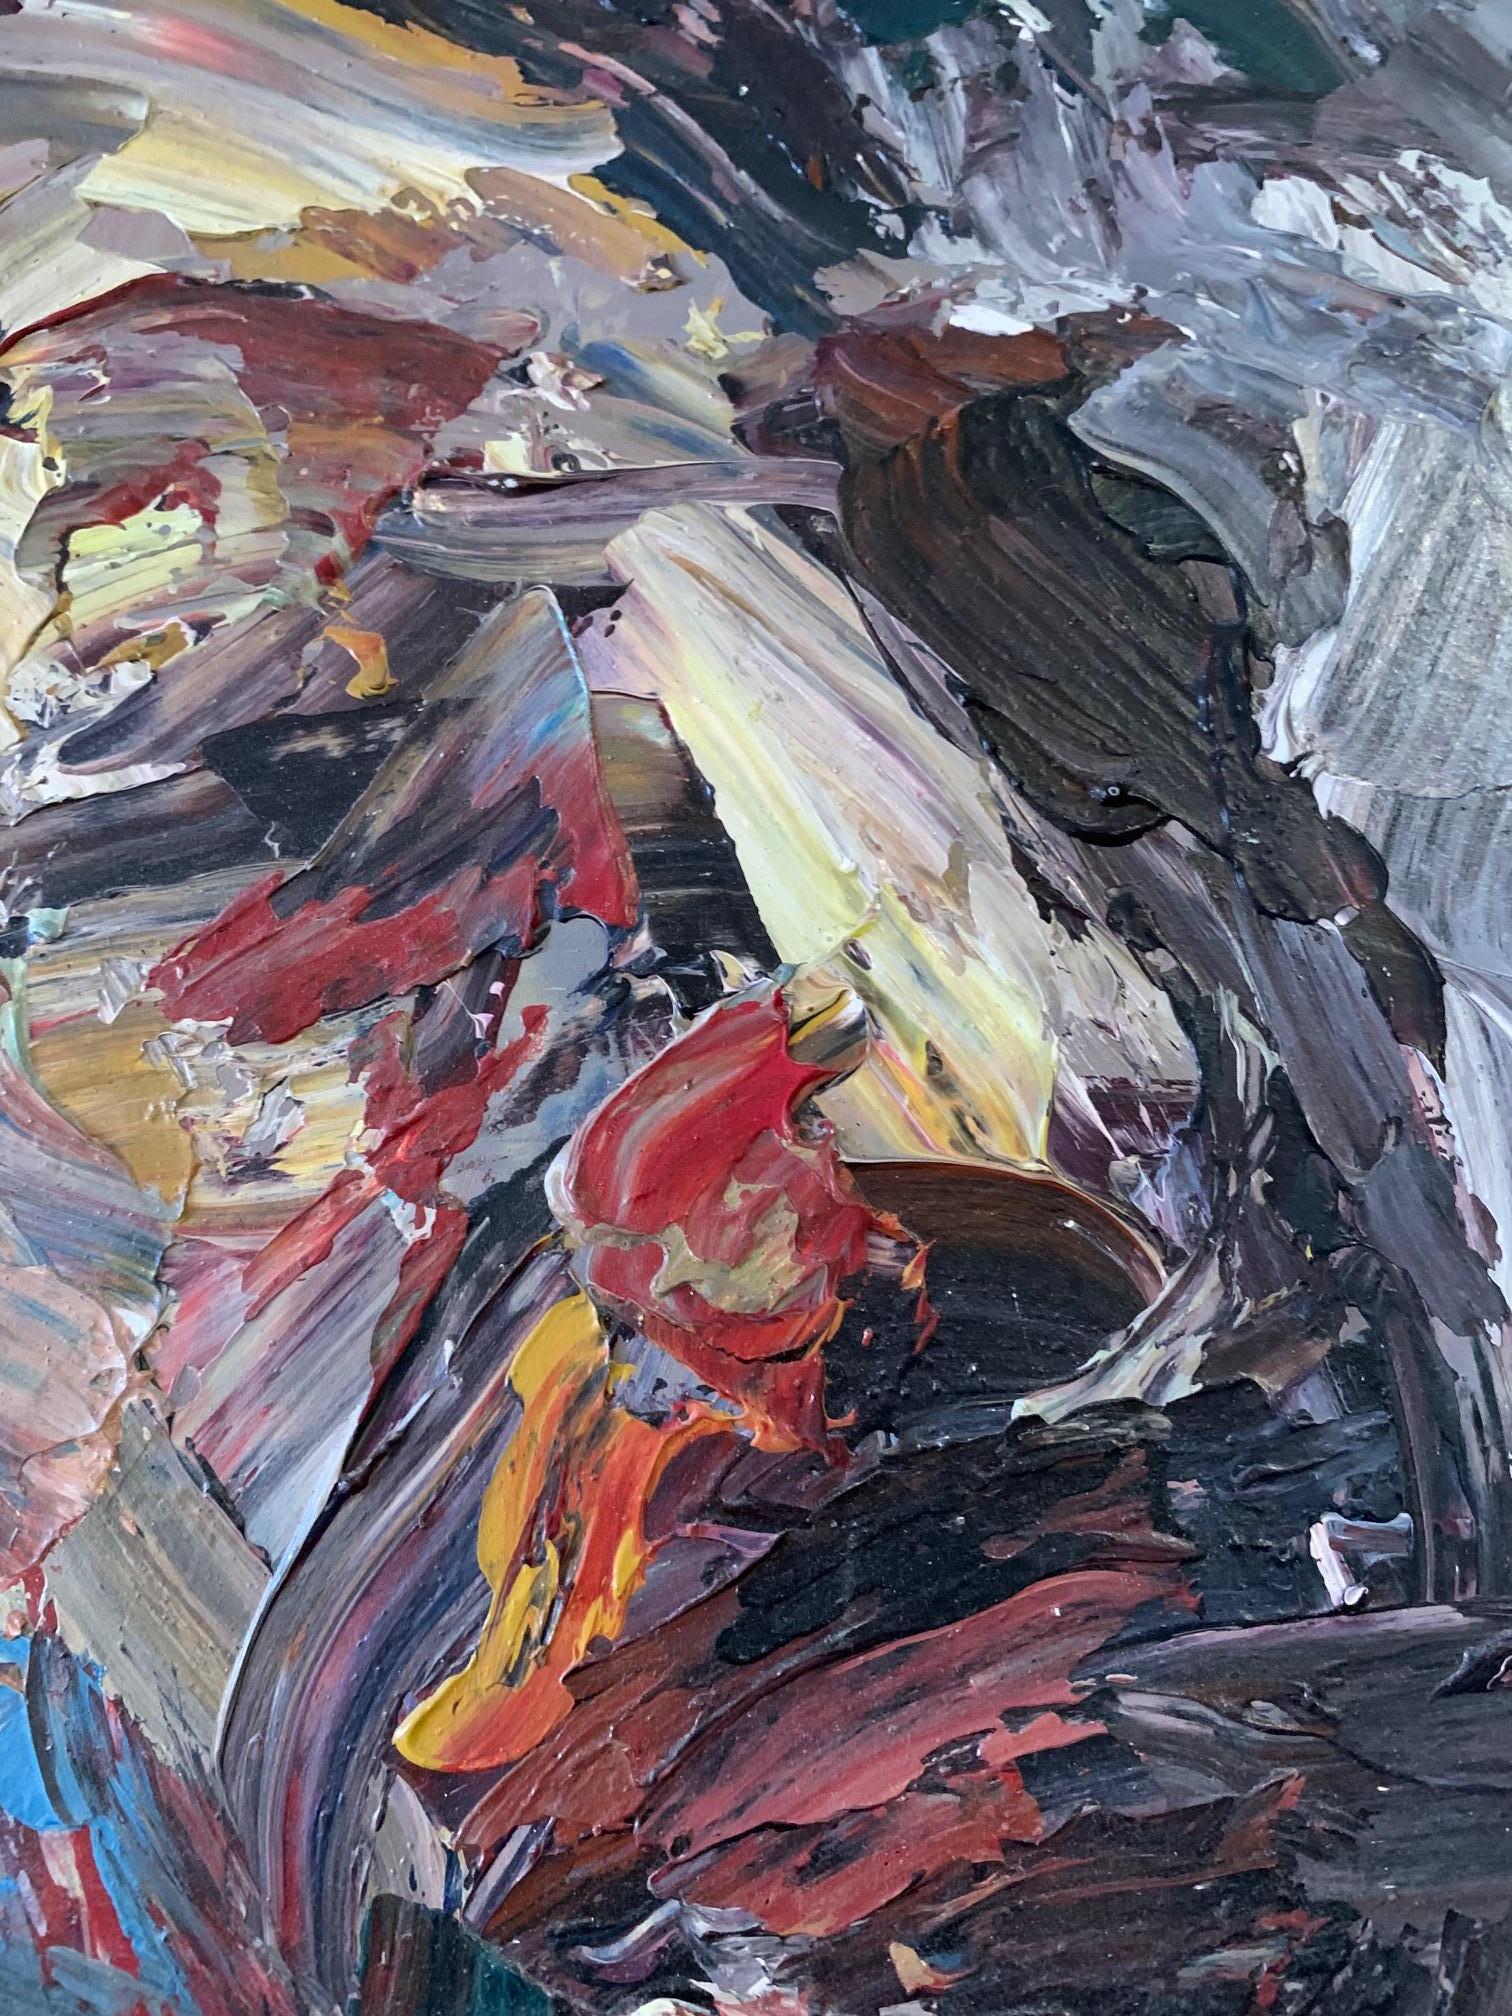 'Untitled' Contemporary Abstract Expressionist Portrait by Masri - Painting by Masri Hayssam